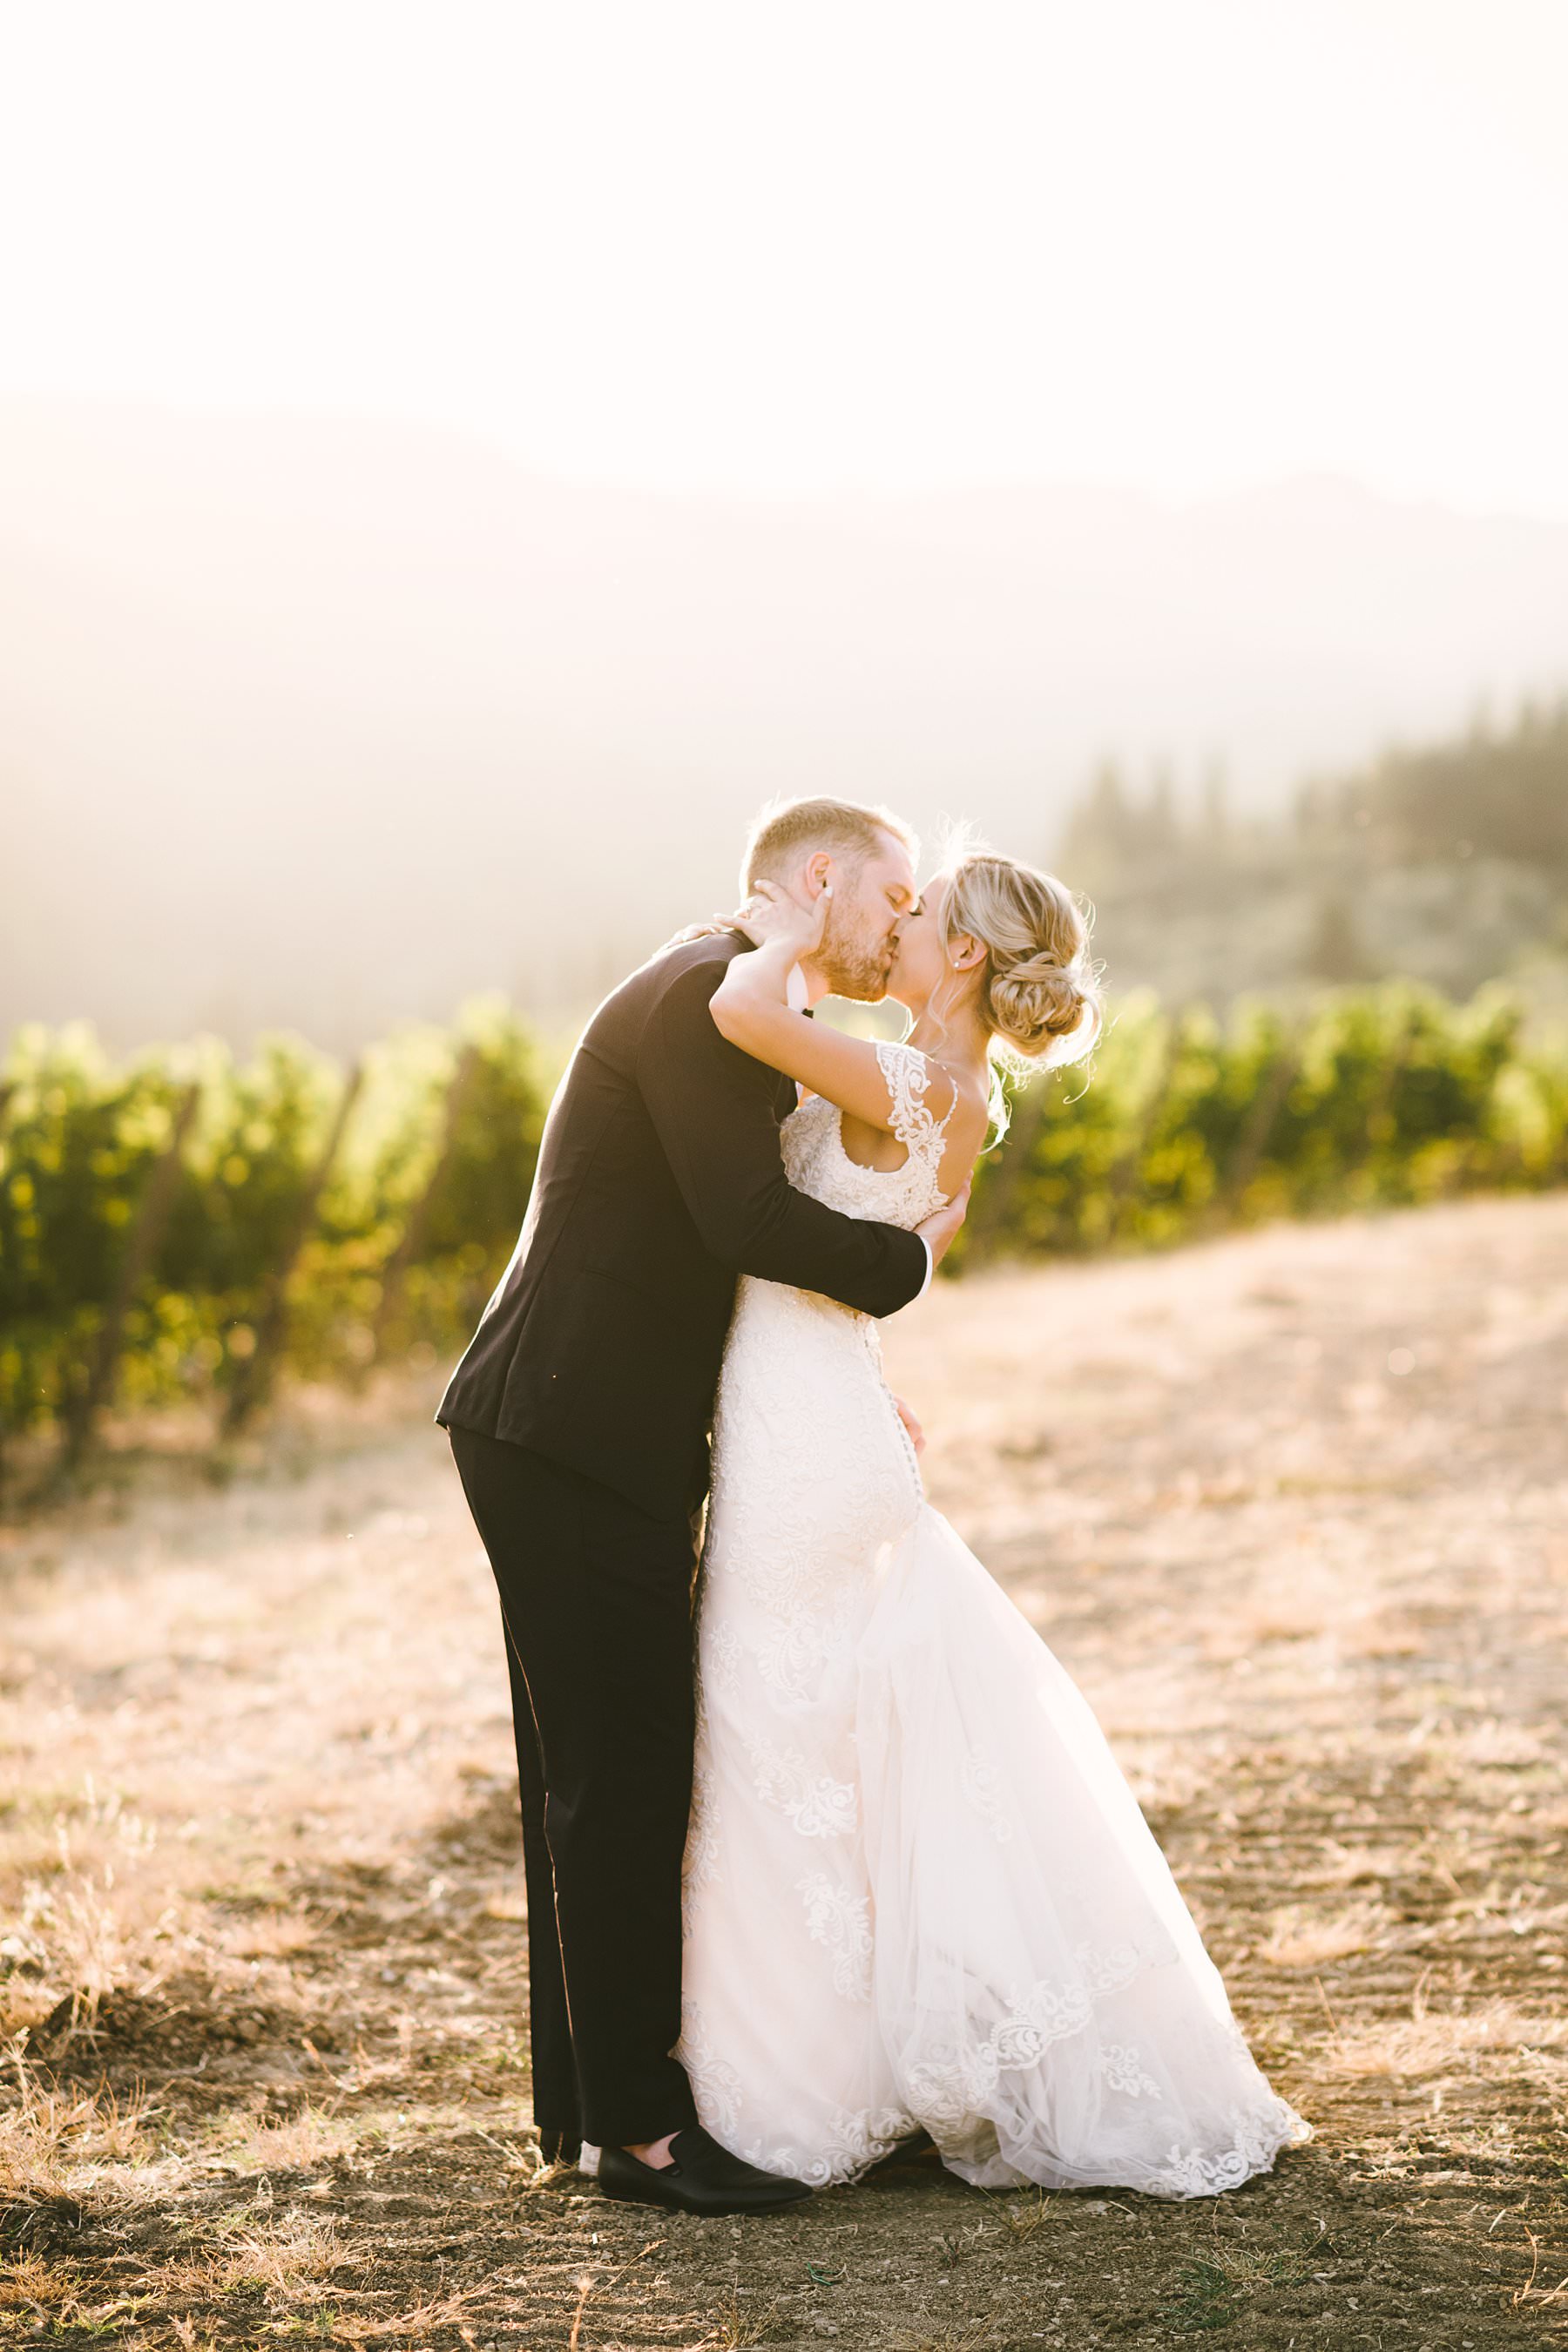 Romantic wedding in Italy at the charming Castello del Trebbio. Dreamy and unforgettable bride and groom wedding portrait during golden hour in the vineyard of the countryside of Tuscany at Castello del Trebbio